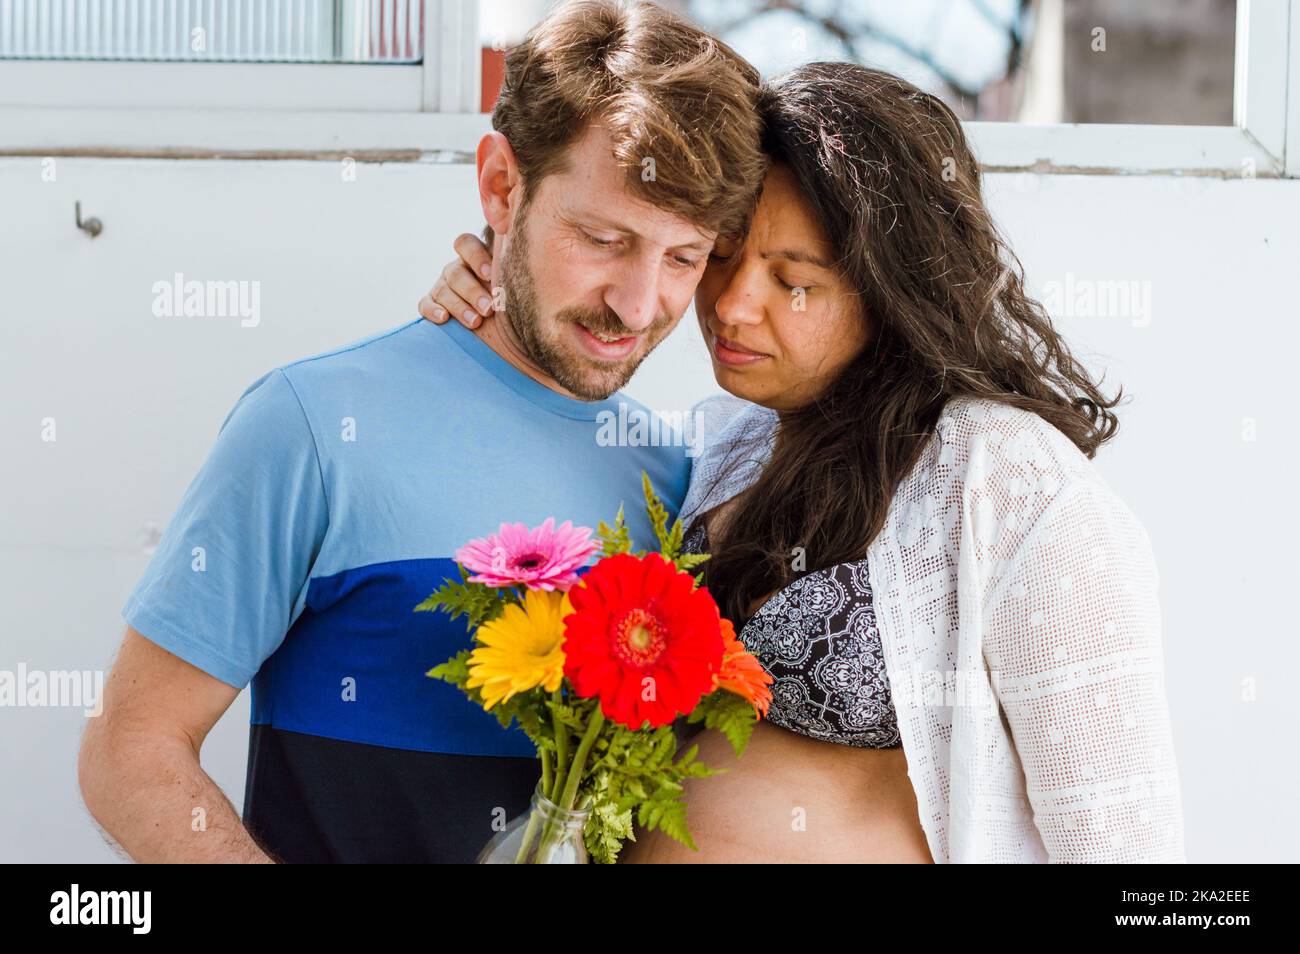 pregnant young couple argentinian man and brazilian woman are standing at home embracing each other holding flowers and looking at the flowers, they a Stock Photo